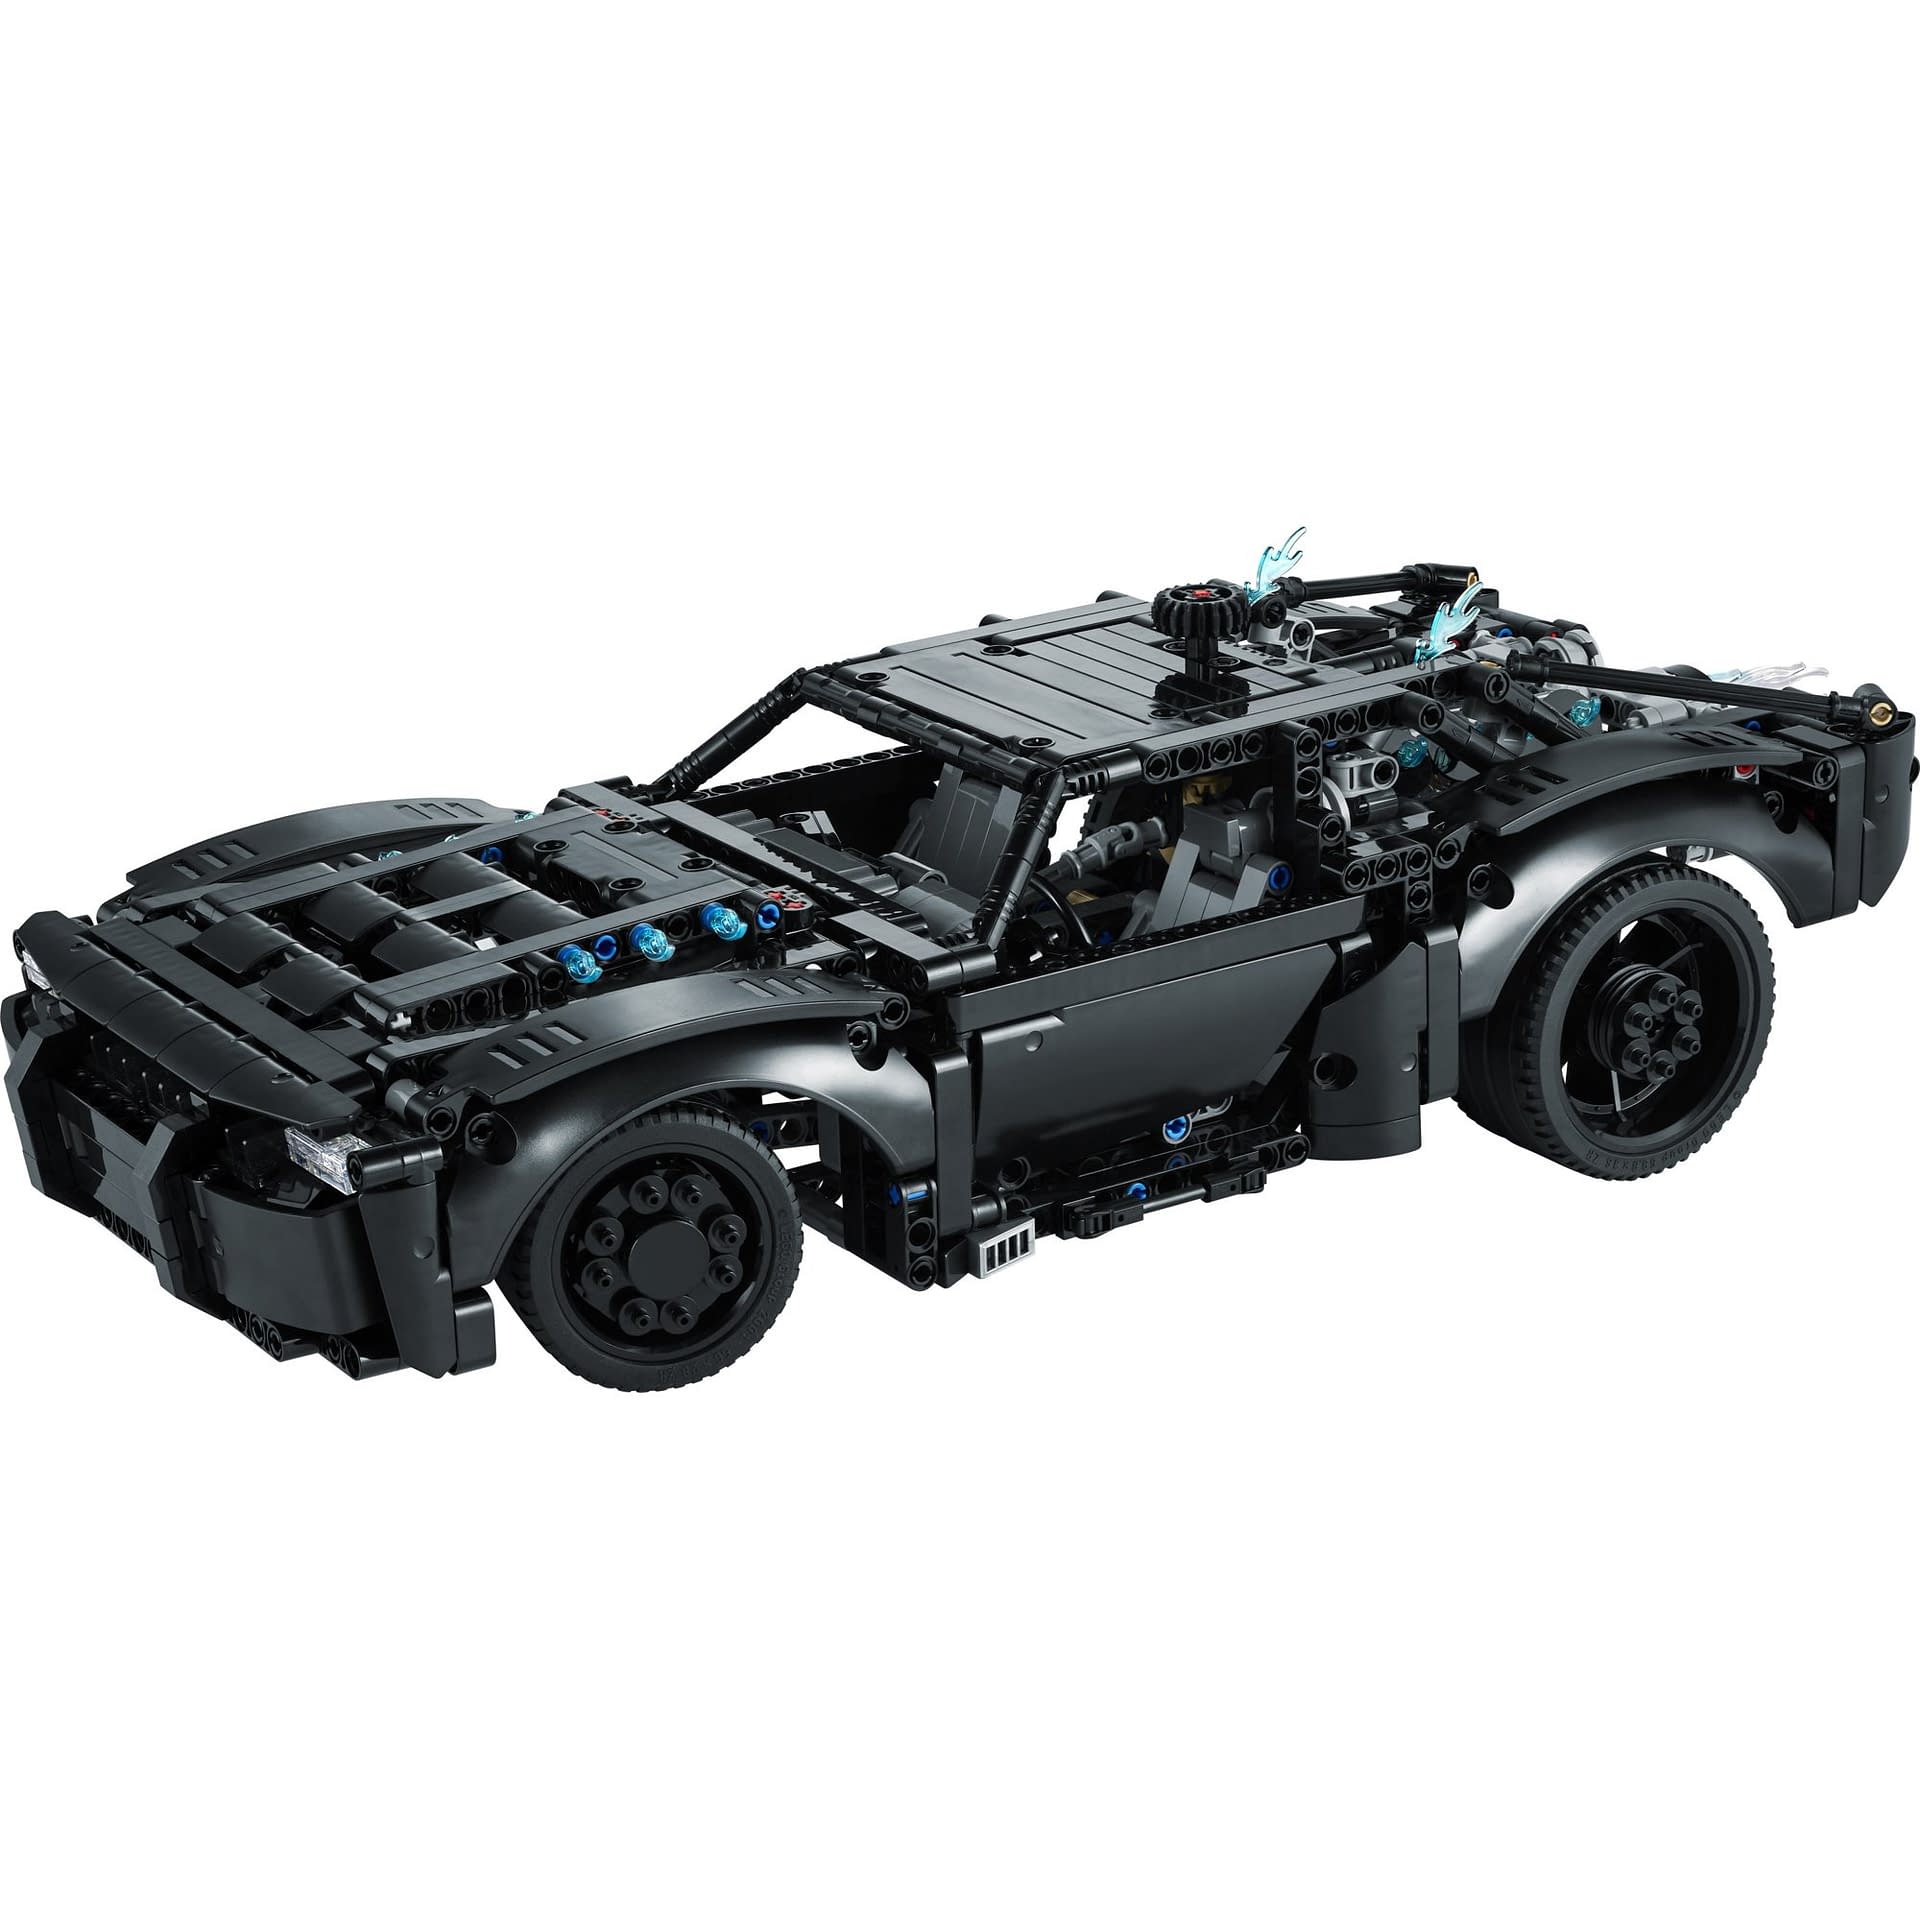 Upcoming The Batman movie LEGO sets revealed, including Technic Batmobile  [News] - The Brothers Brick